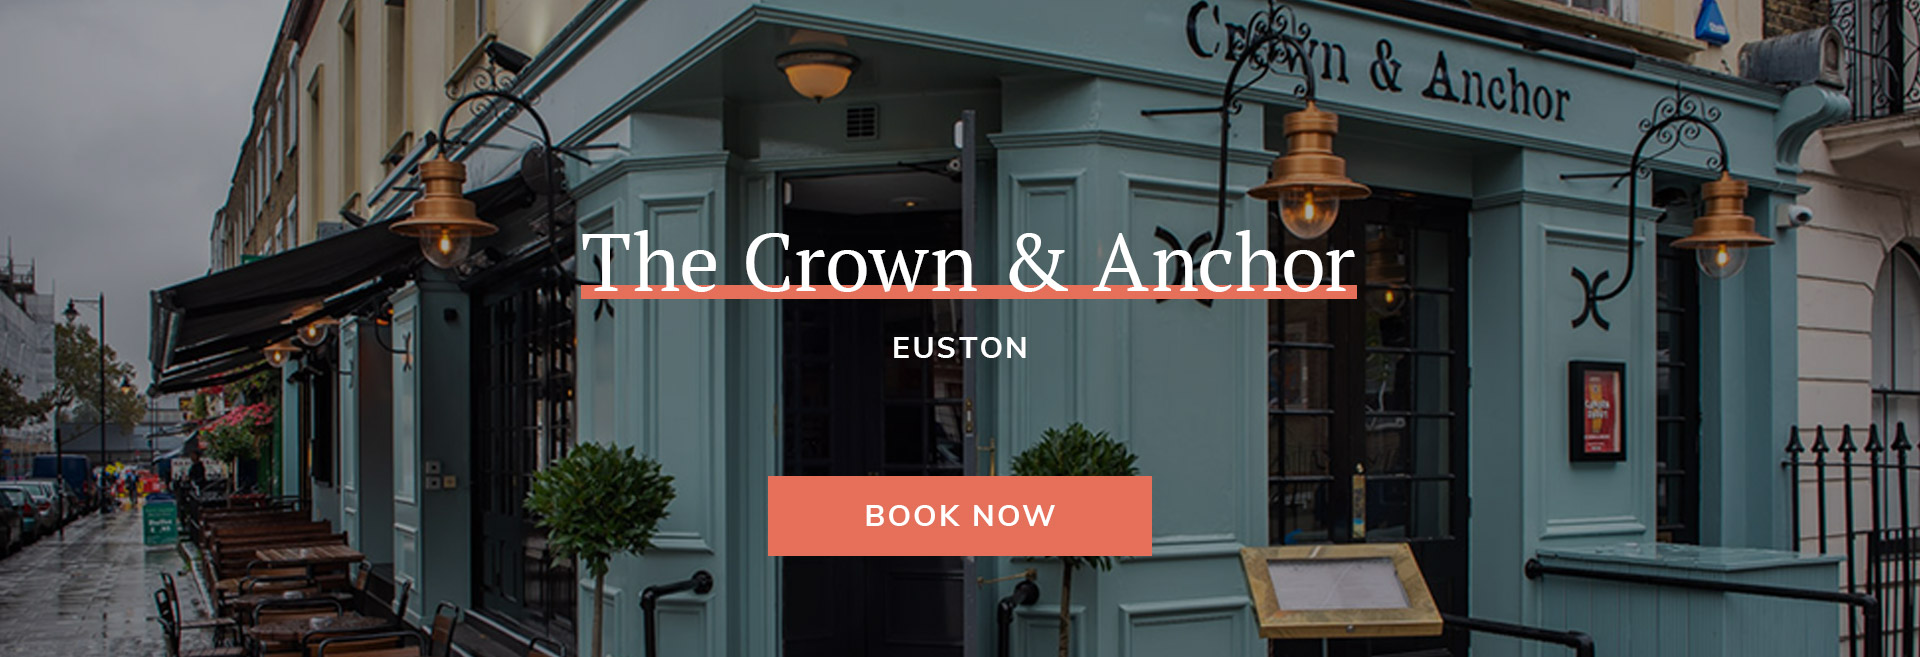 The Crown and Anchor Euston Banner 1